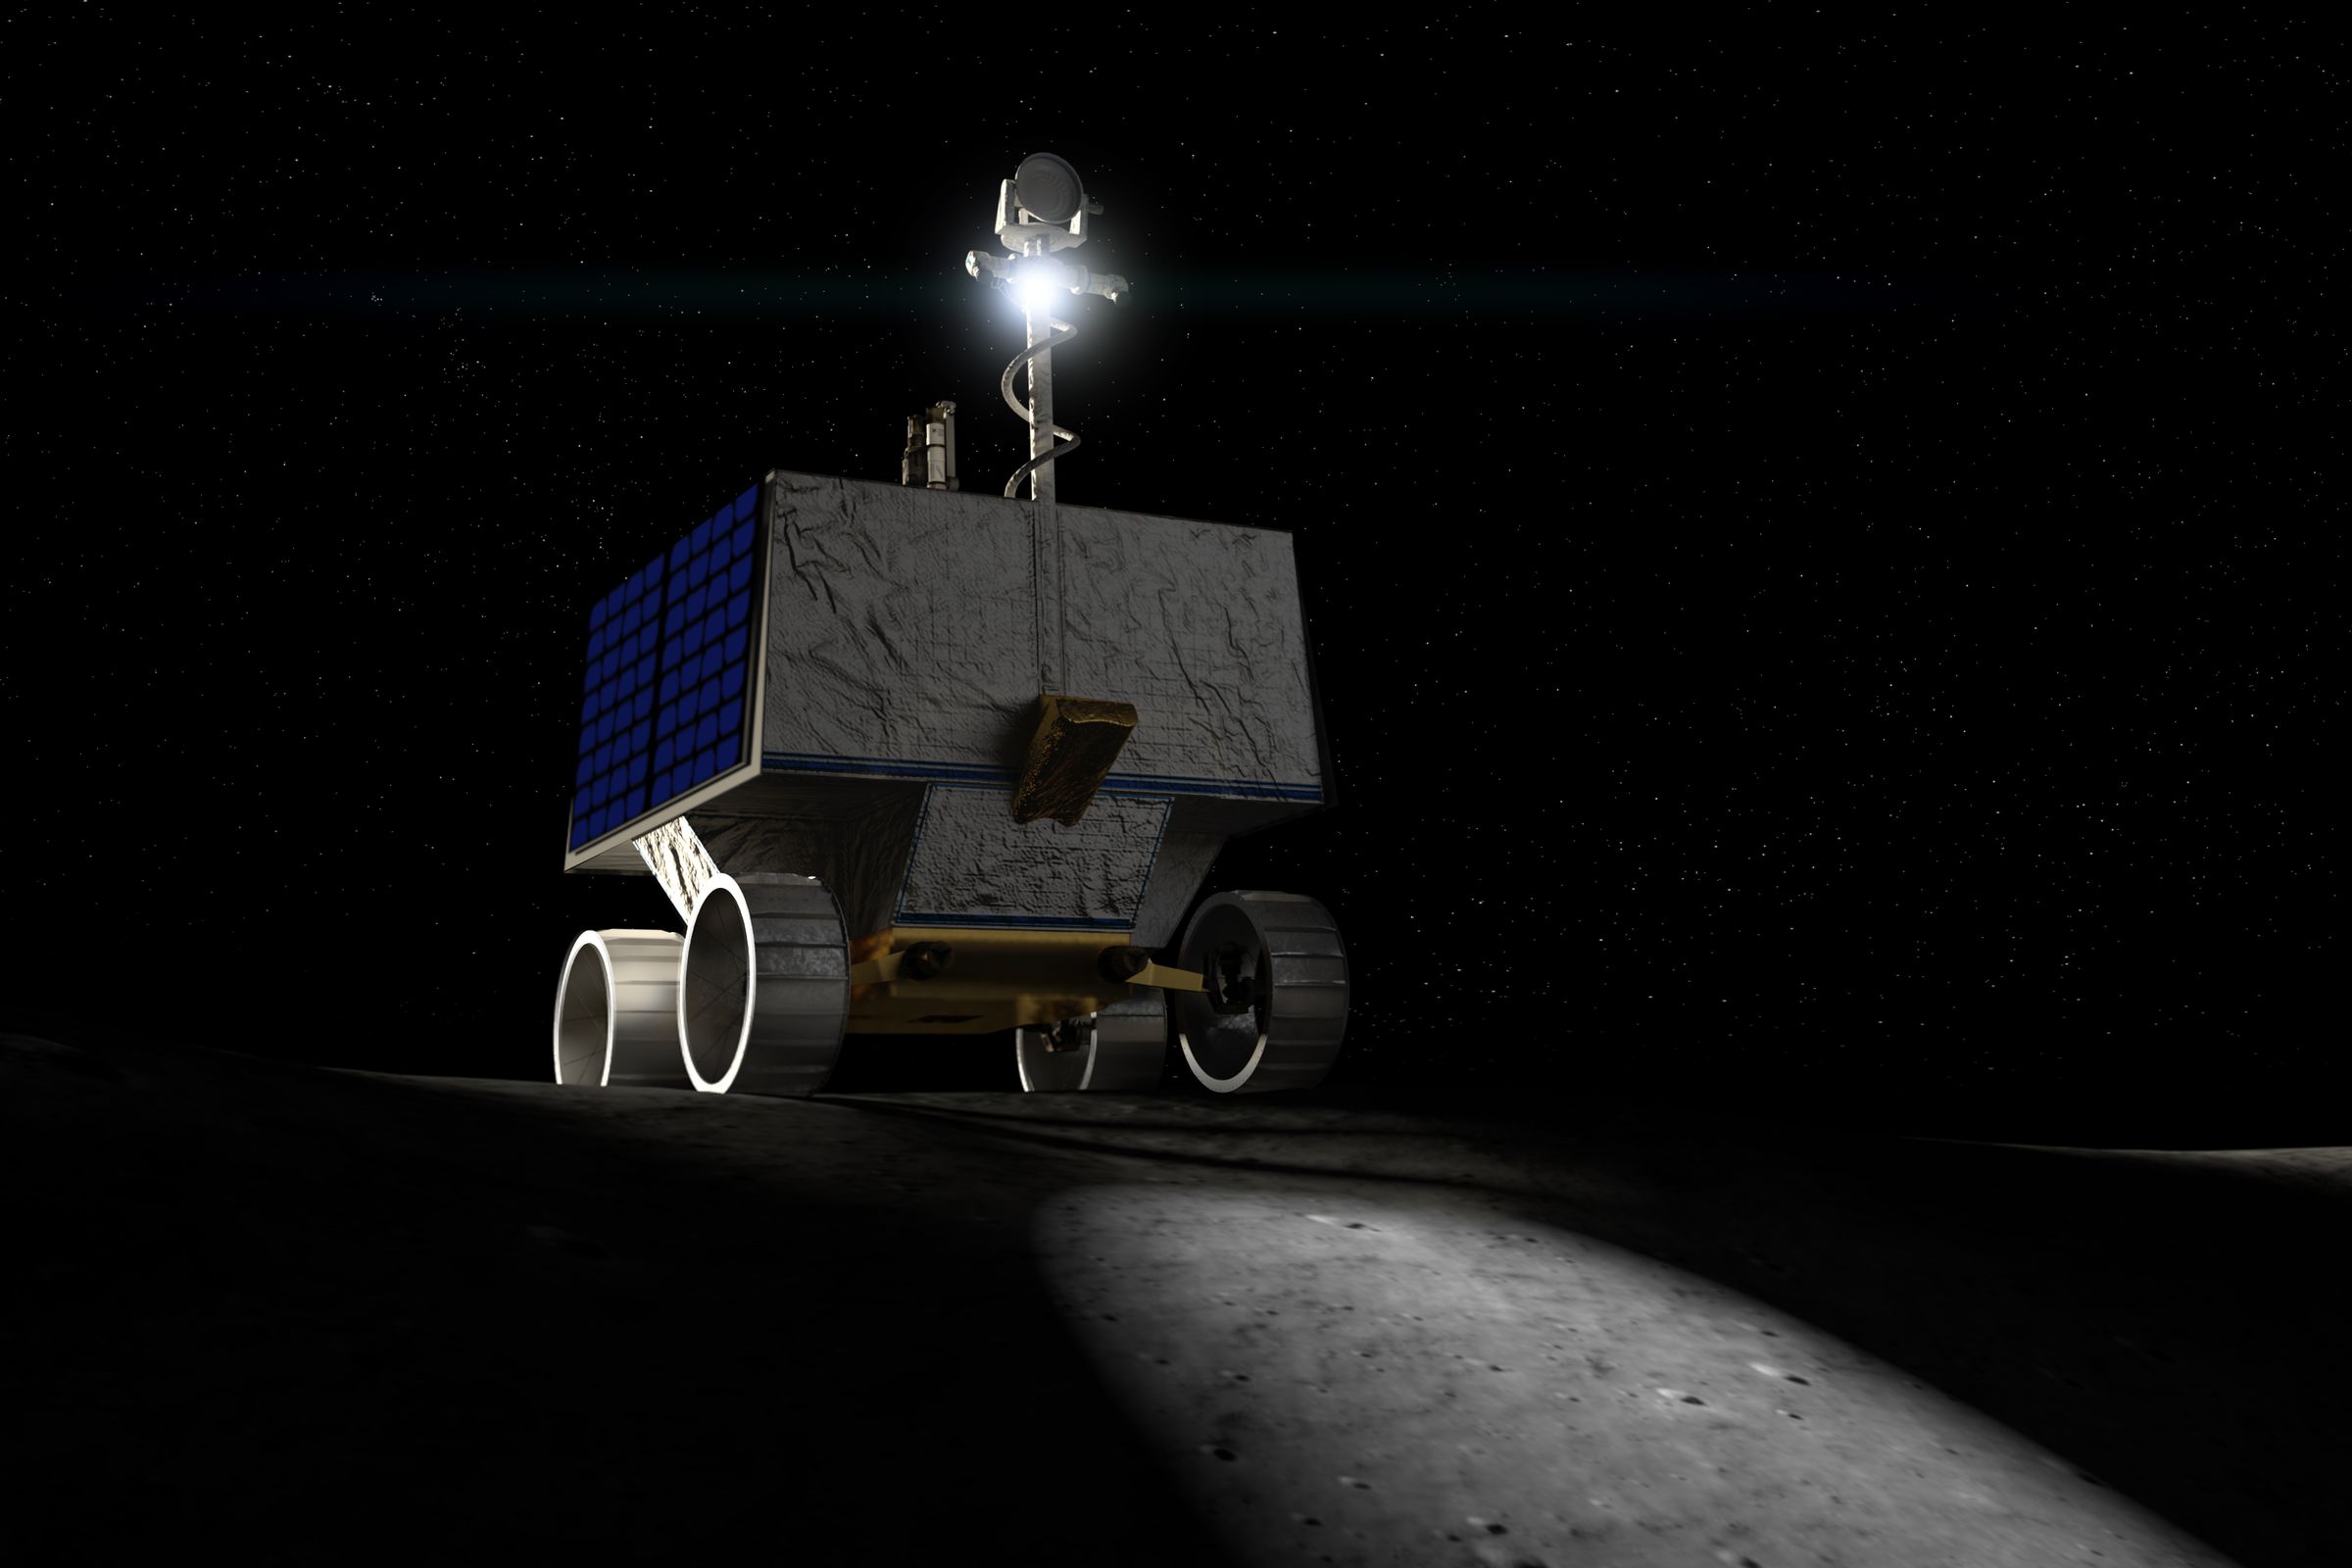 A rover with a light is pictured exploring the lunar surface in the dark. 